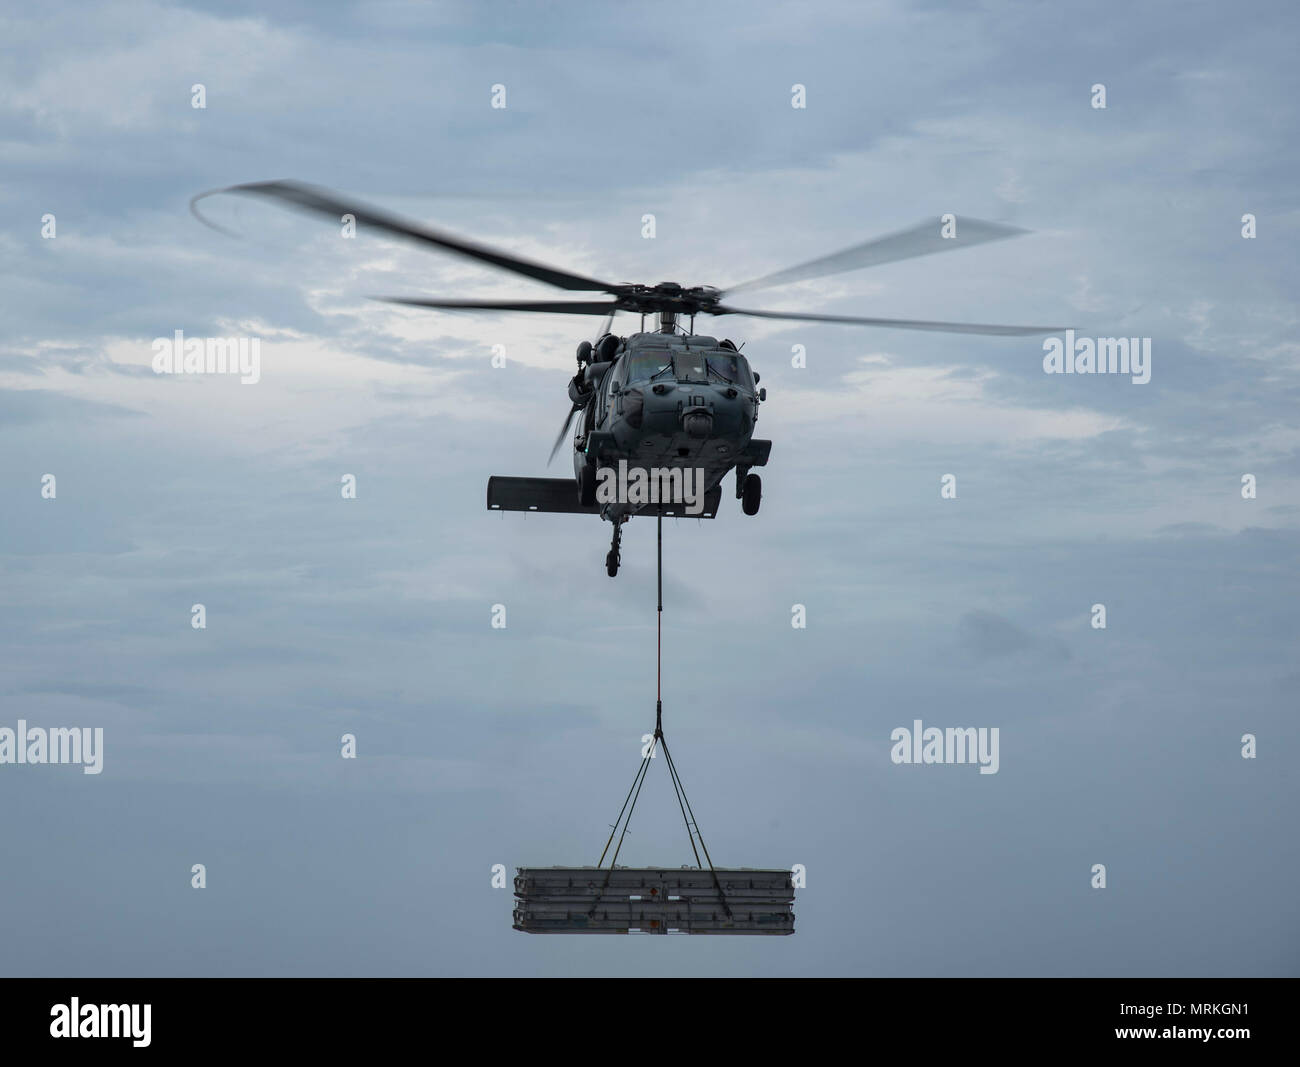 170620-N-QI061-044   ATLANTIC OCEAN (June 20, 2017) An MH-60S Sea Hawk assigned to the Dusty Dogs of Helicopter Sea Combat Squadron (HSC) 7 delivers ammunition crates to the Military Sealift Command dry cargo and ammunition ship USNS Medgar Evers (T-AKE 13) during an ammunition off load with the aircraft carrier USS Dwight D. Eisenhower (CVN 69) (Ike). Ike is underway during the sustainment phase of the Optimized Fleet Response Plan (OFRP). (U.S. Navy photo by Mass Communication Specialist 3rd Class Nathan T. Beard) Stock Photo